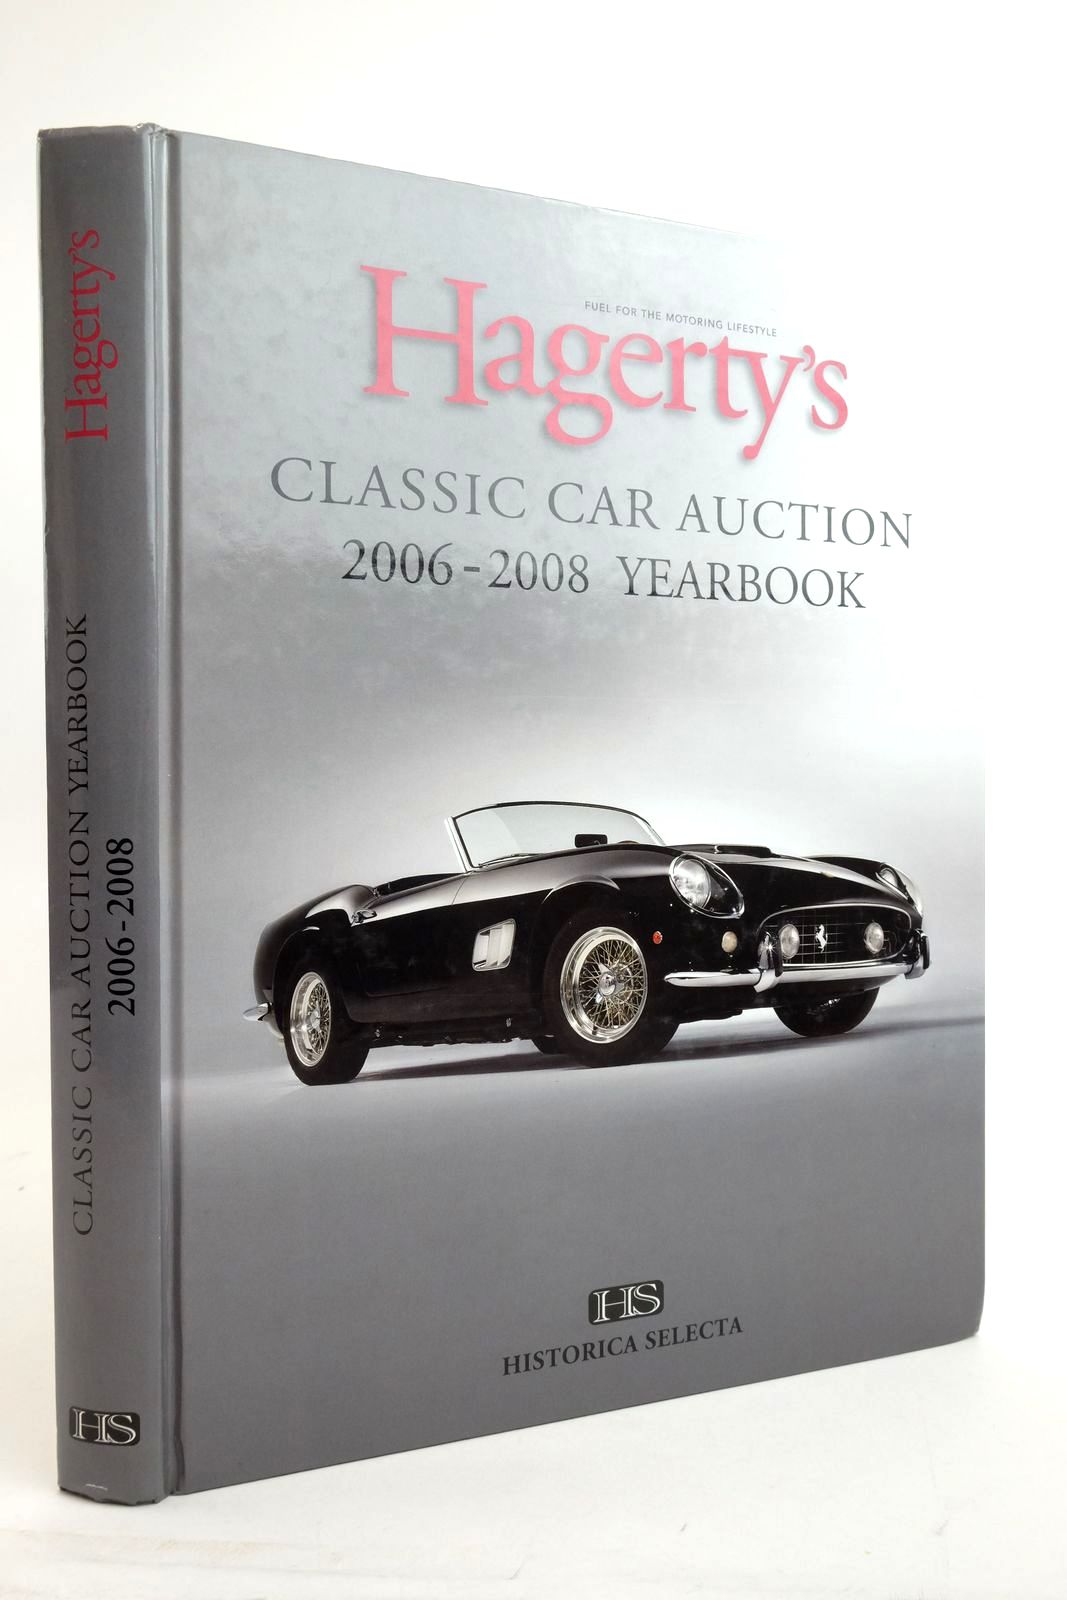 Photo of HAGERTY'S CLASSIC CAR AUCTION 2006 - 2008 YEARBOOK written by Orsi, Adolfo Hagerty, McKeel published by Historica Selecta (STOCK CODE: 2136576)  for sale by Stella & Rose's Books